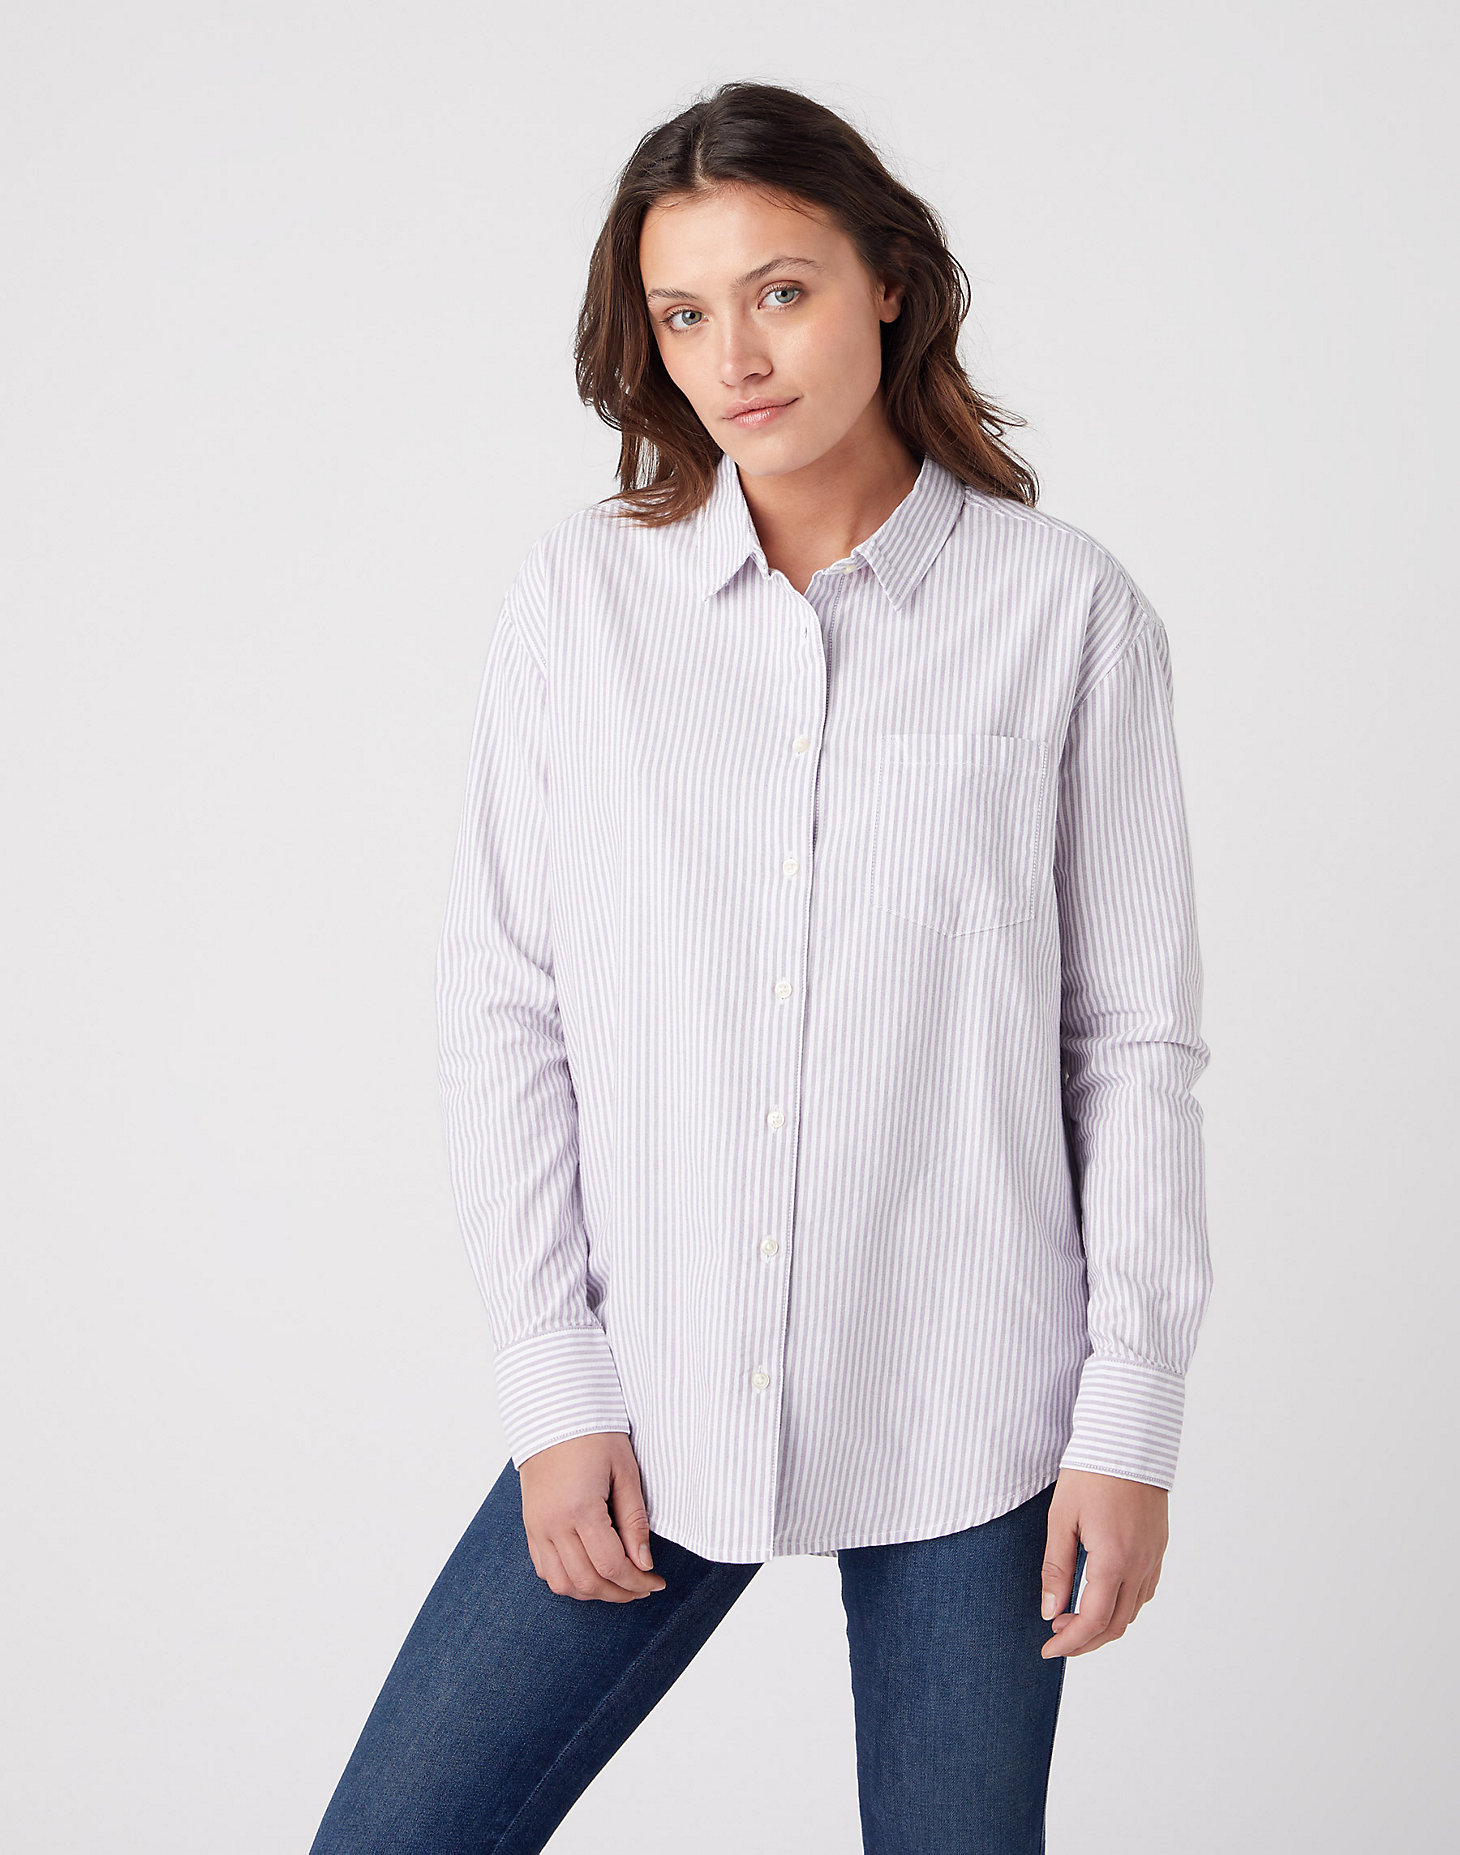 Oxford Shirt in Orchid Mist main view